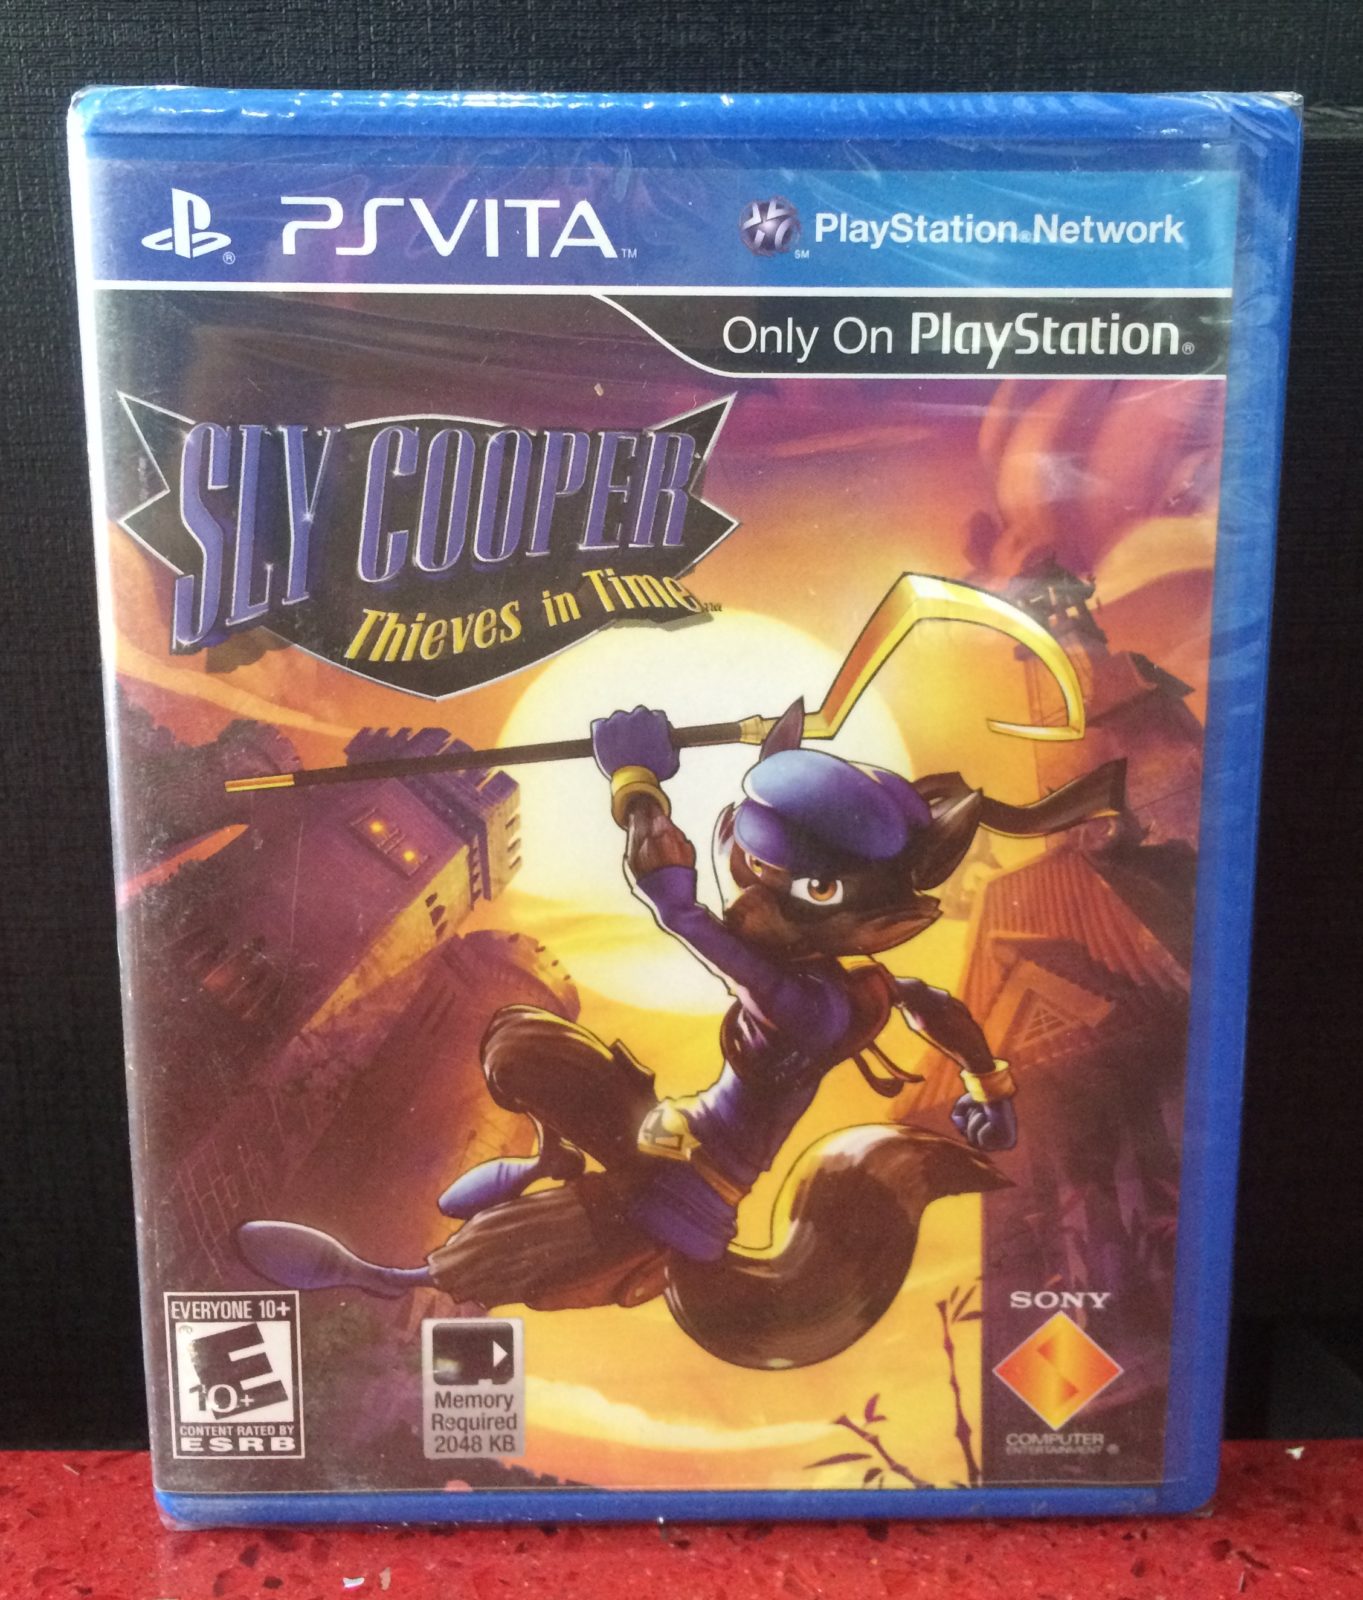 PS Vita Sly Cooper Thieves in Time – GameStation